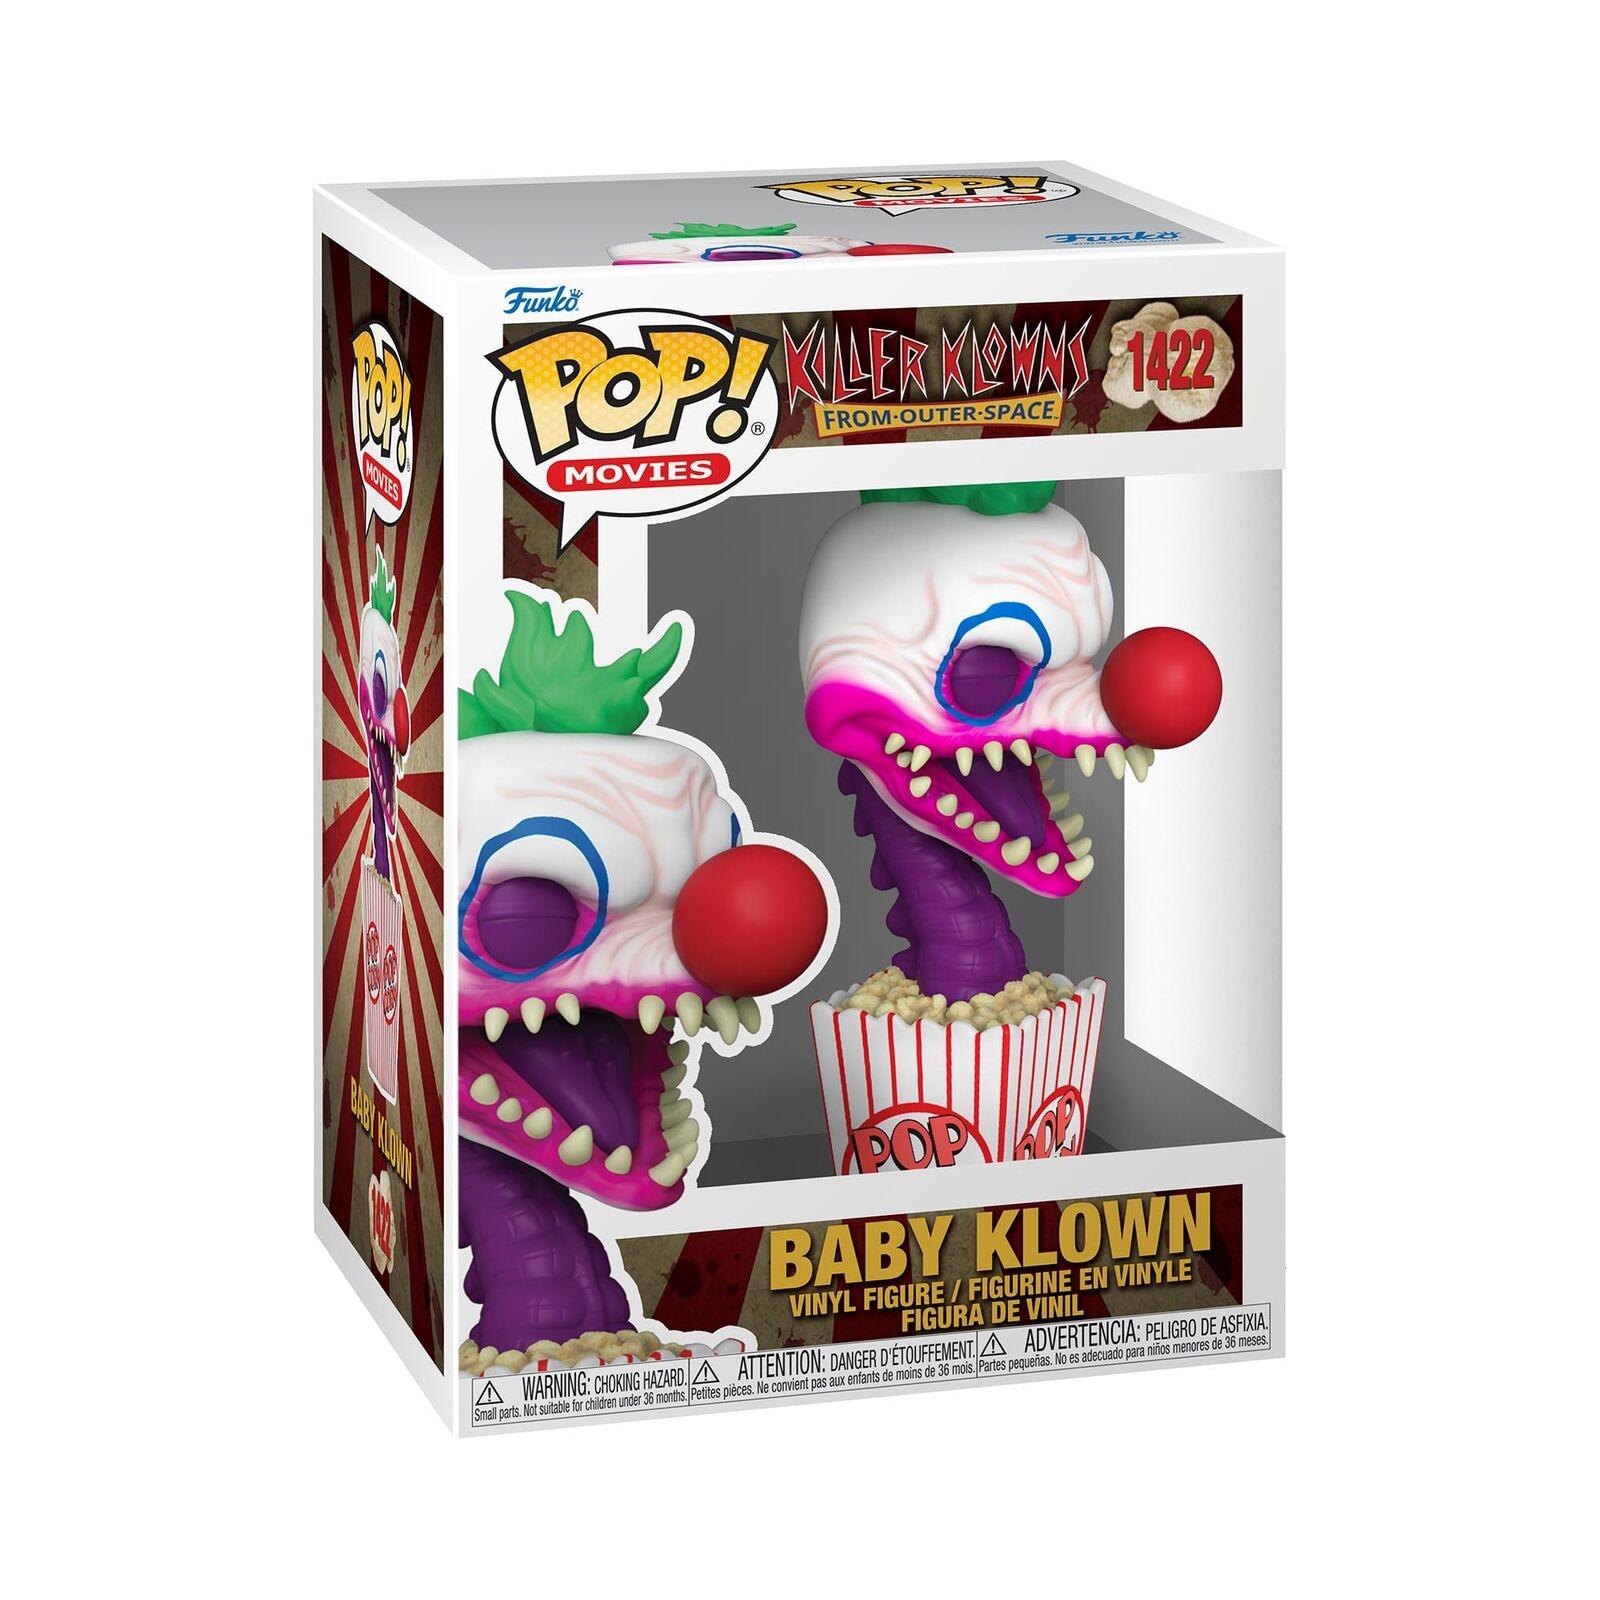 Pop! Movies - Killer Klowns From Outer Space - Baby Klown - #1422 - Hobby Champion Inc